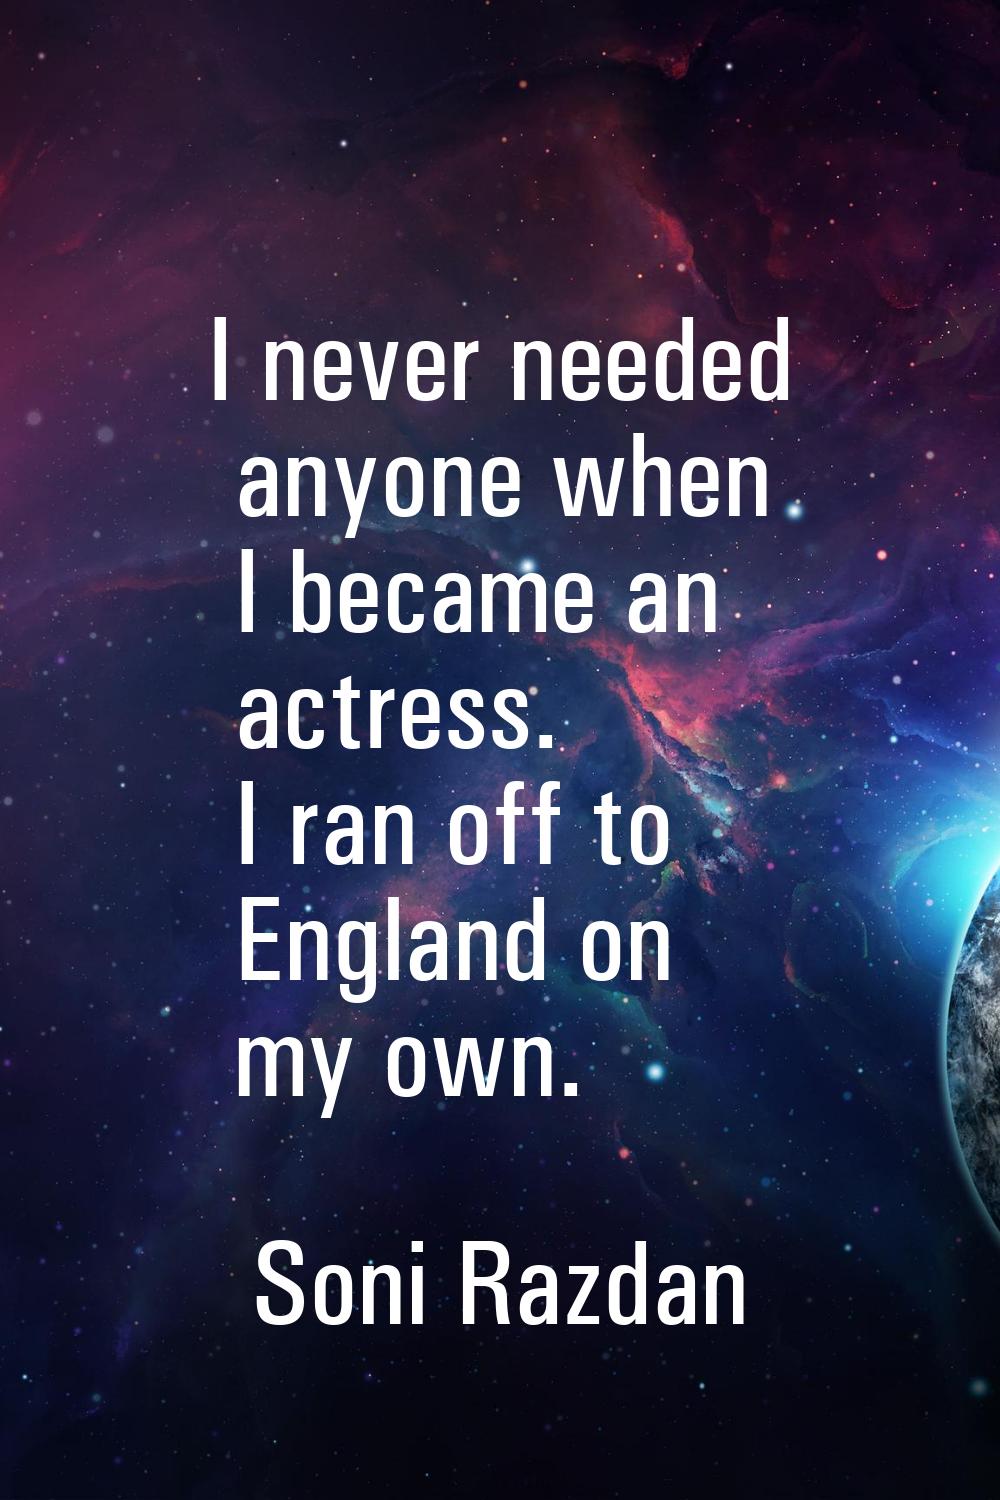 I never needed anyone when I became an actress. I ran off to England on my own.